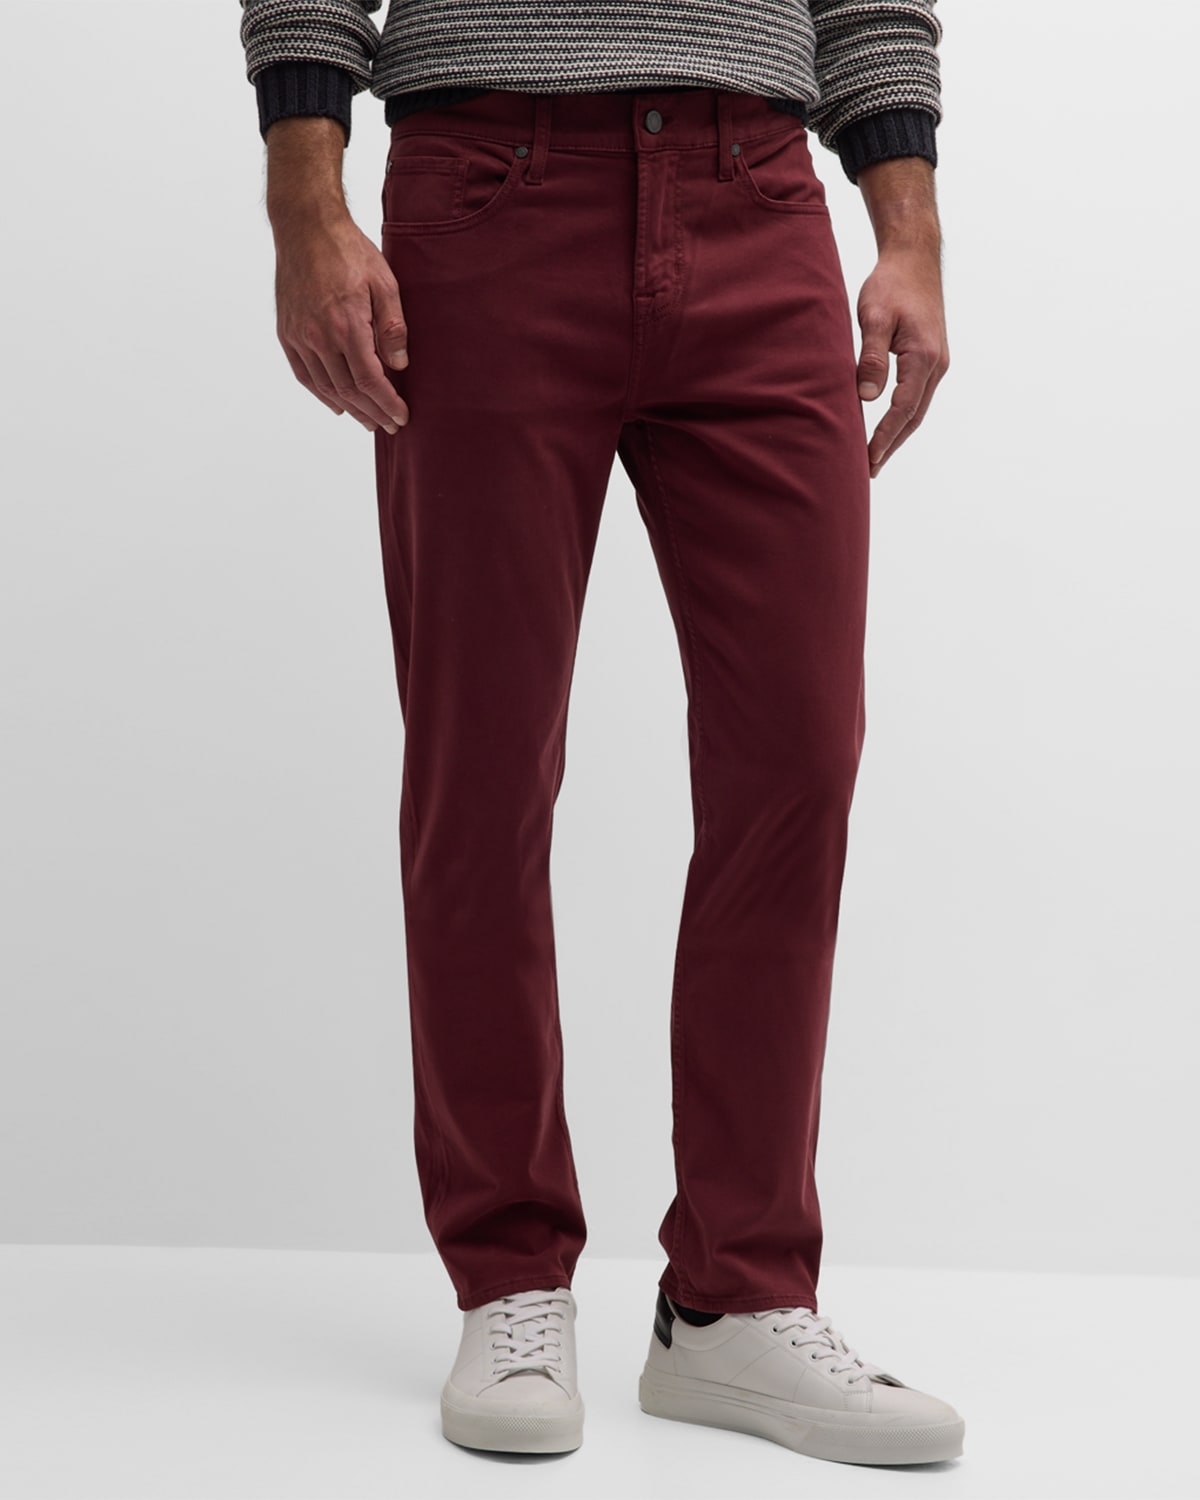 7 FOR ALL MANKIND MEN'S SLIMMY LUXE PERFORMANCE PLUS PANTS